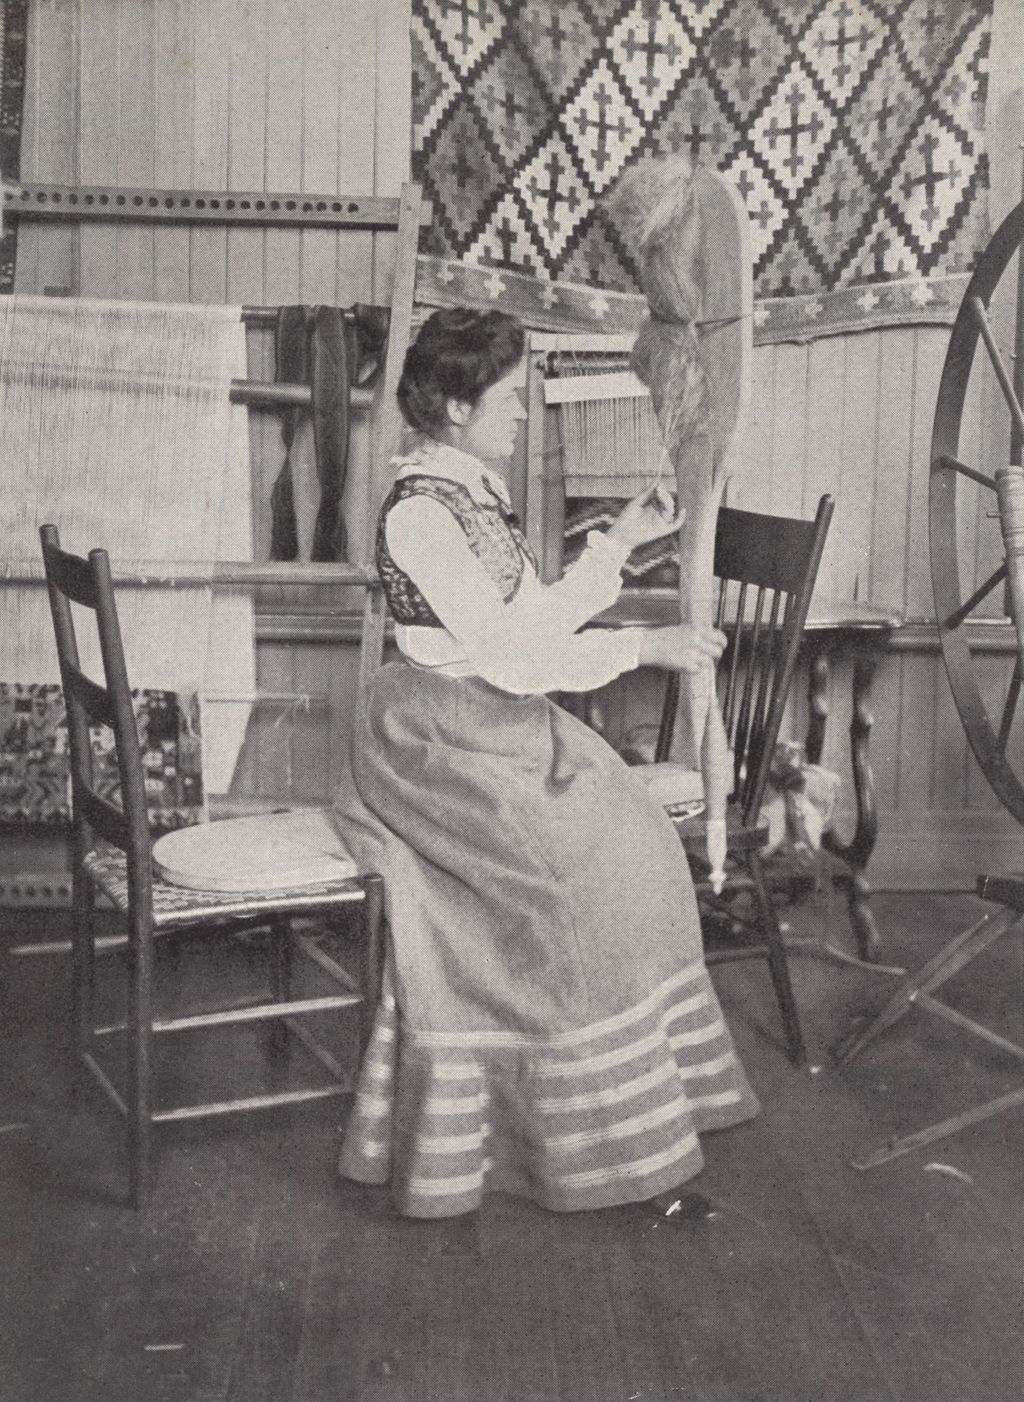 Miniature of Woman hand-spinning yarn at Hull-House Labor Museum